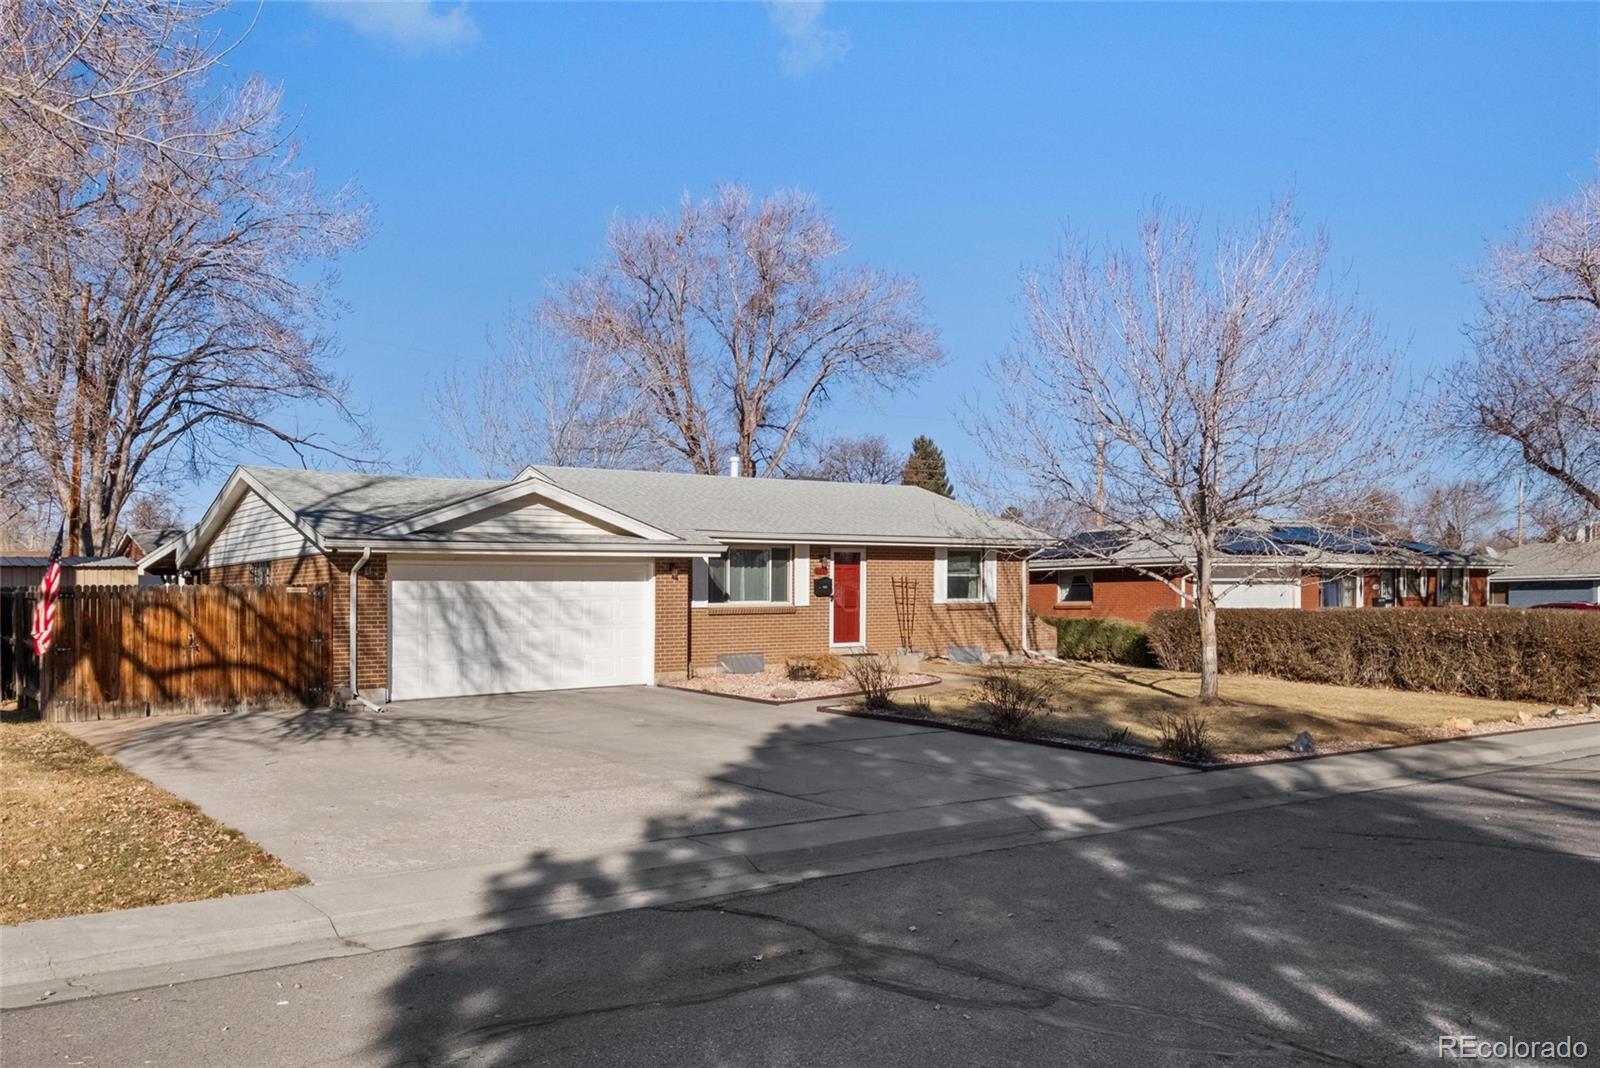 8645 w utah avenue, Lakewood sold home. Closed on 2024-04-05 for $575,000.